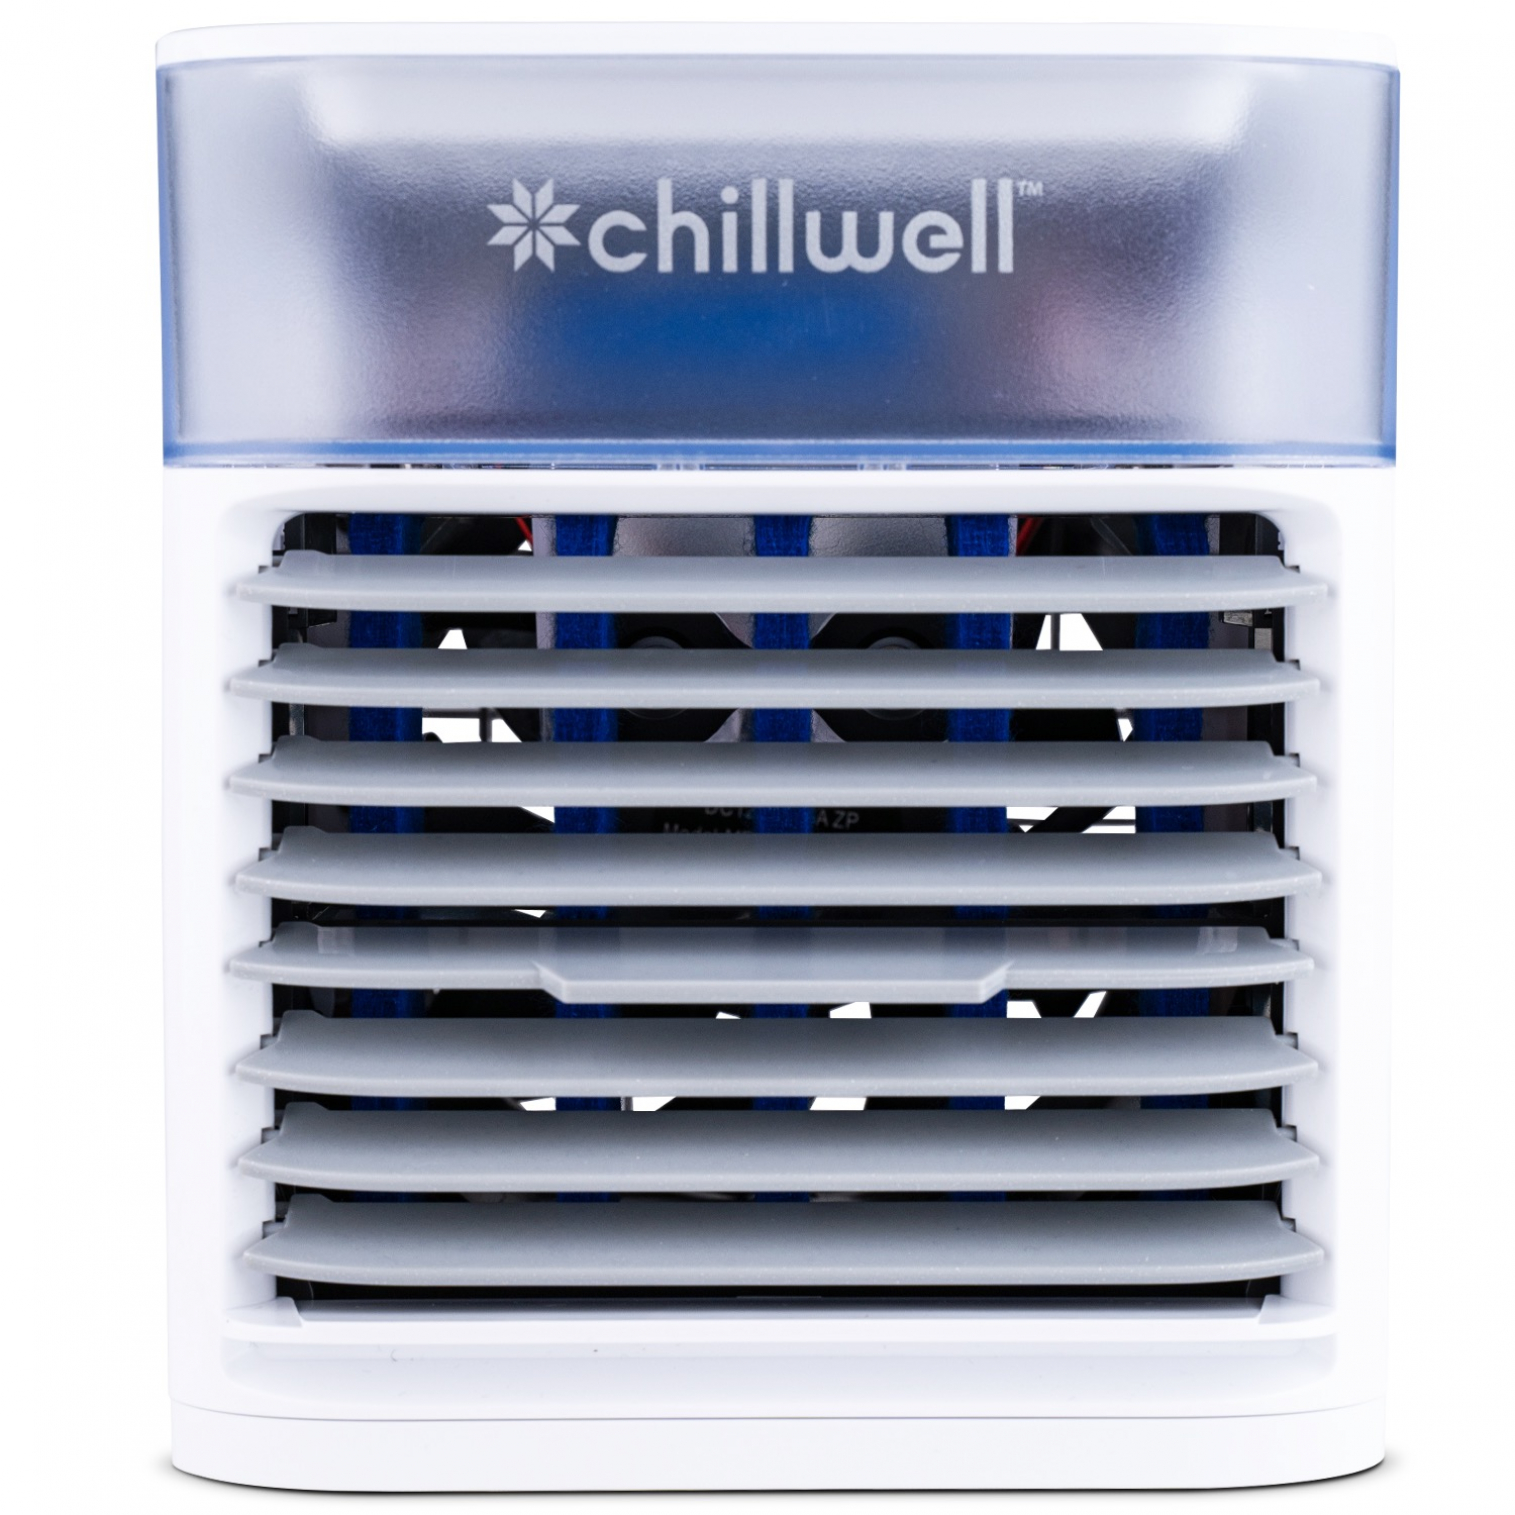 Does The Chillwell AC Conditioner Really Work